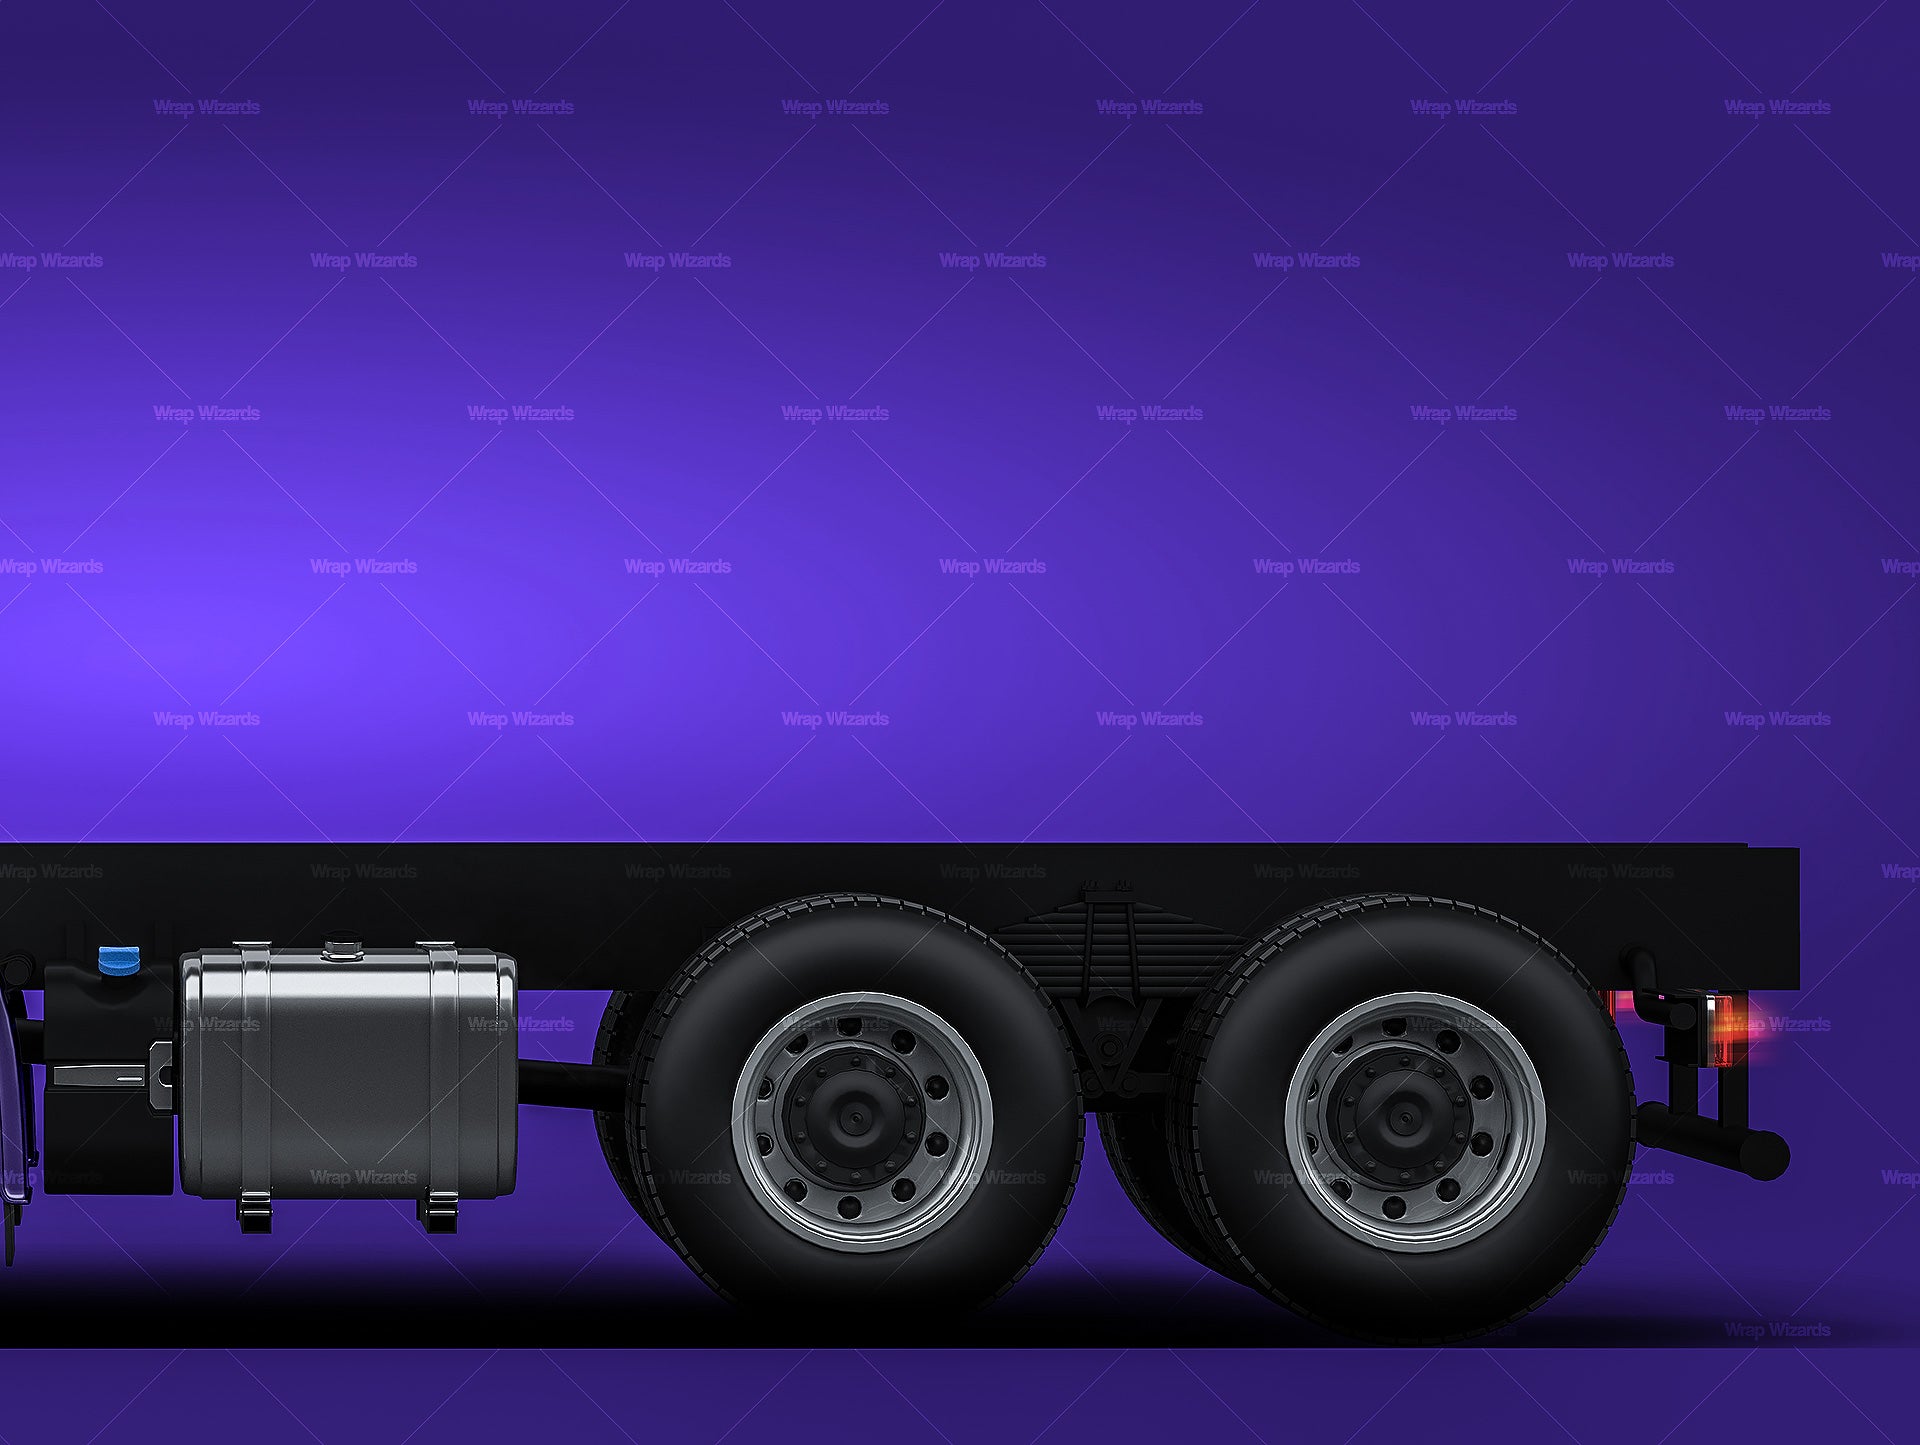 Iveco X-Way Chassis glossy finish - all sides Car Mockup Template.psd